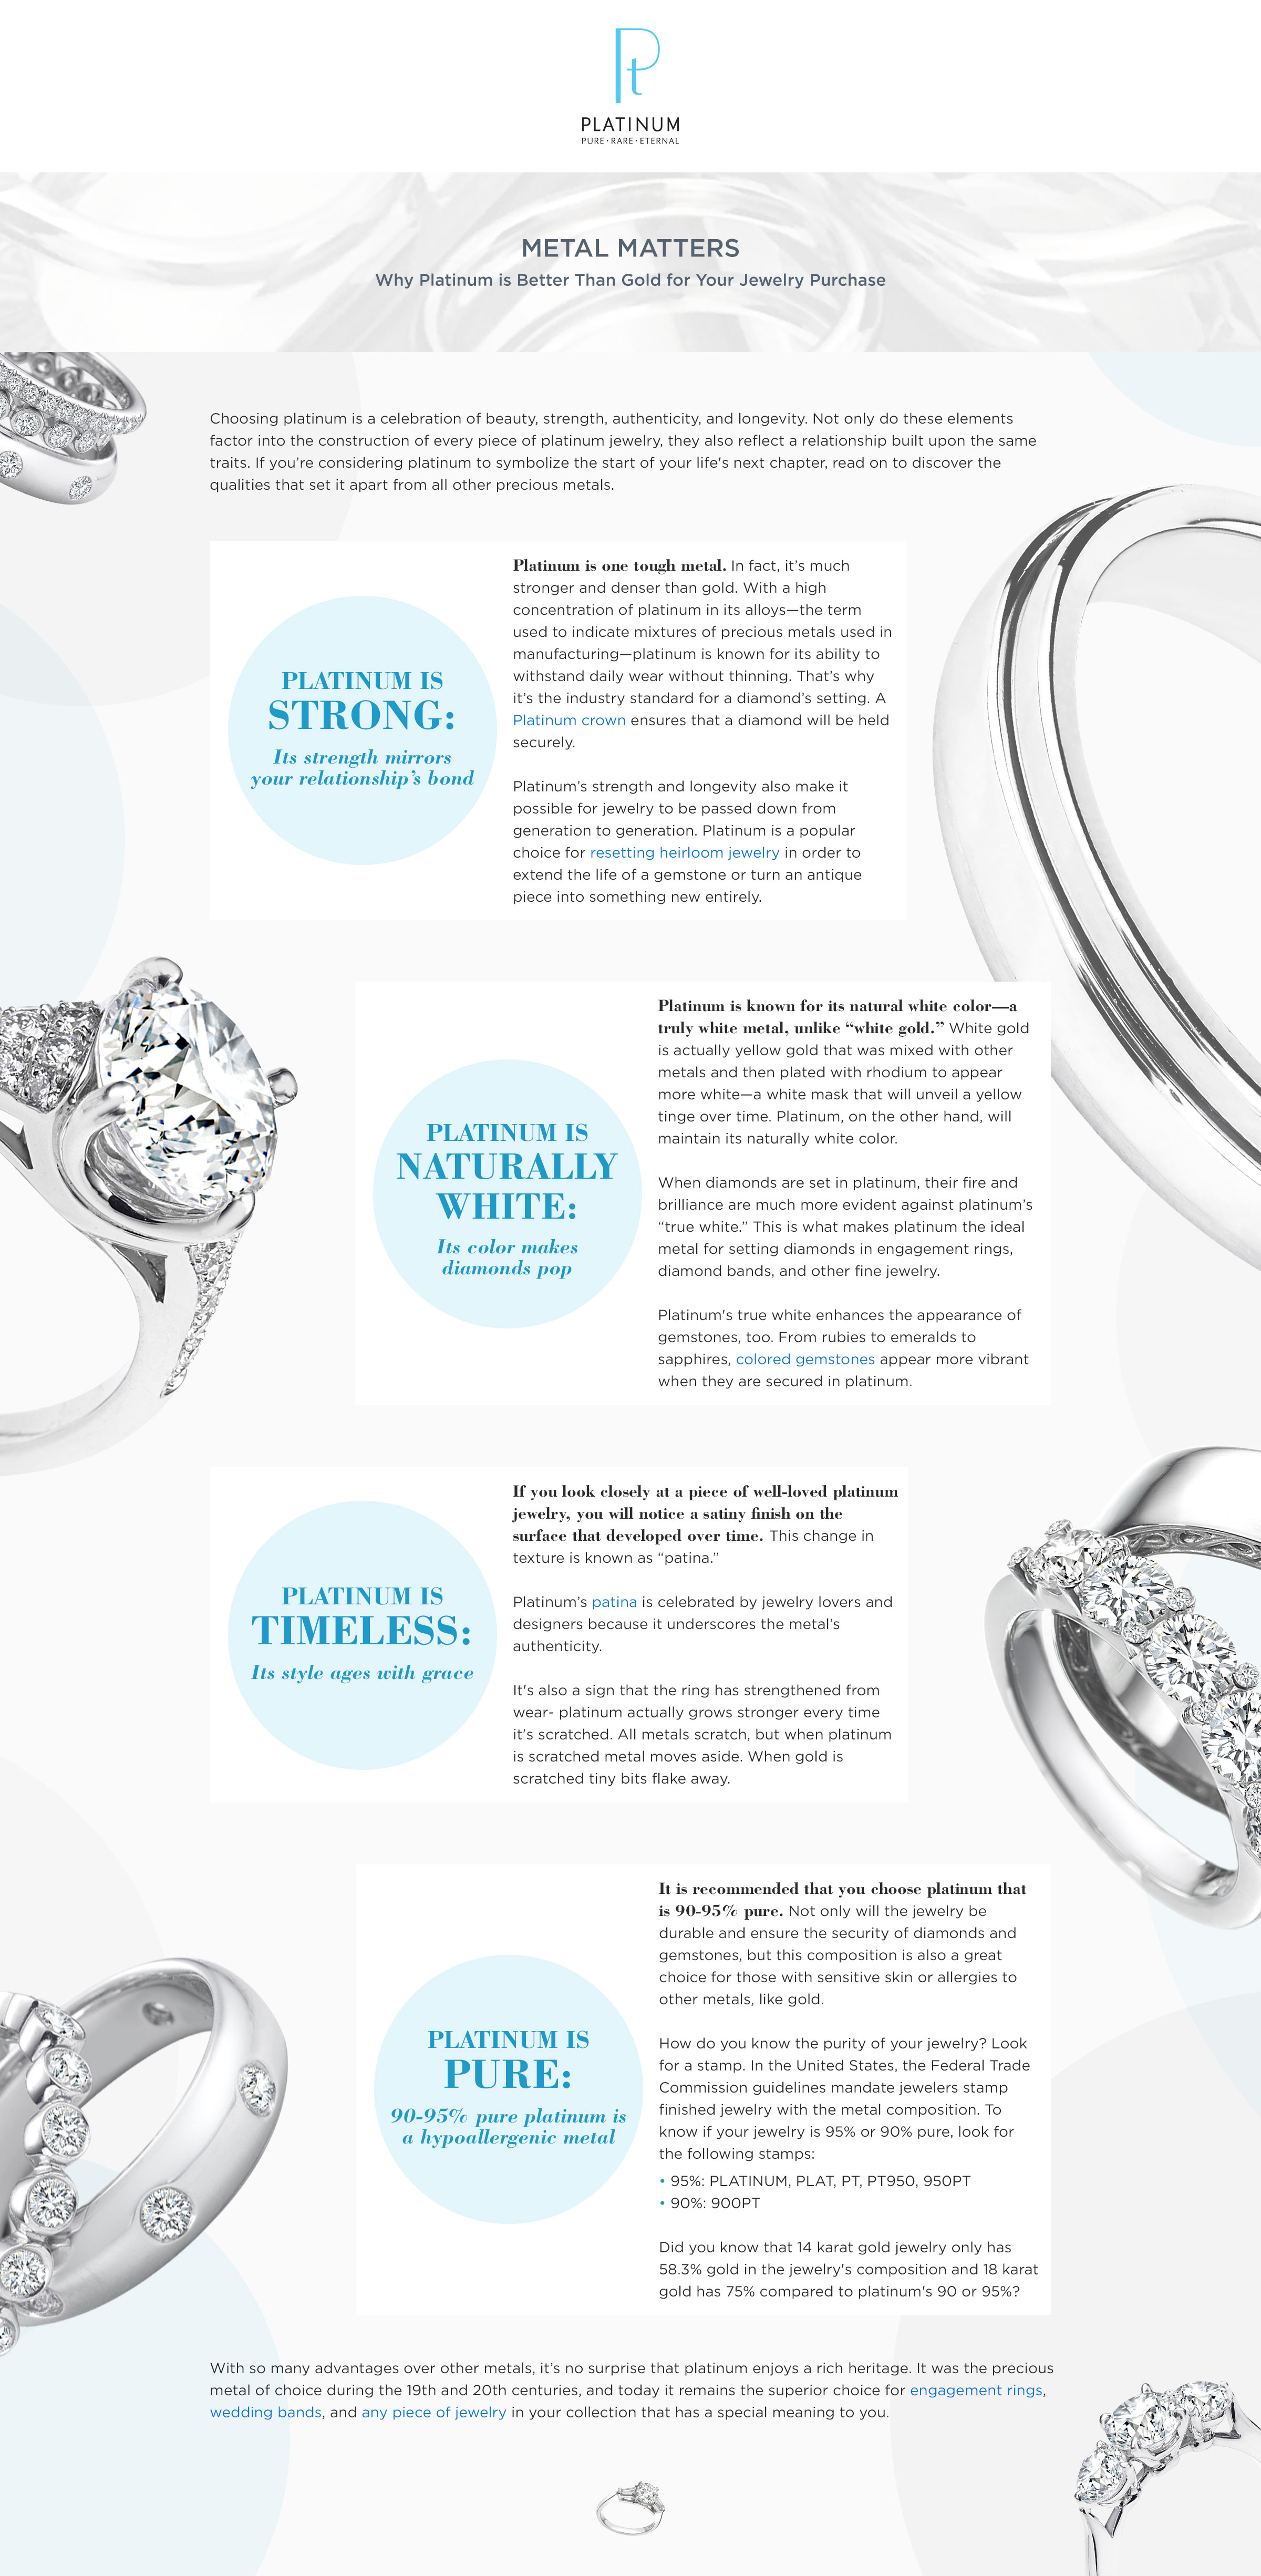 Common Alloys and Metals Used in Engagement Rings